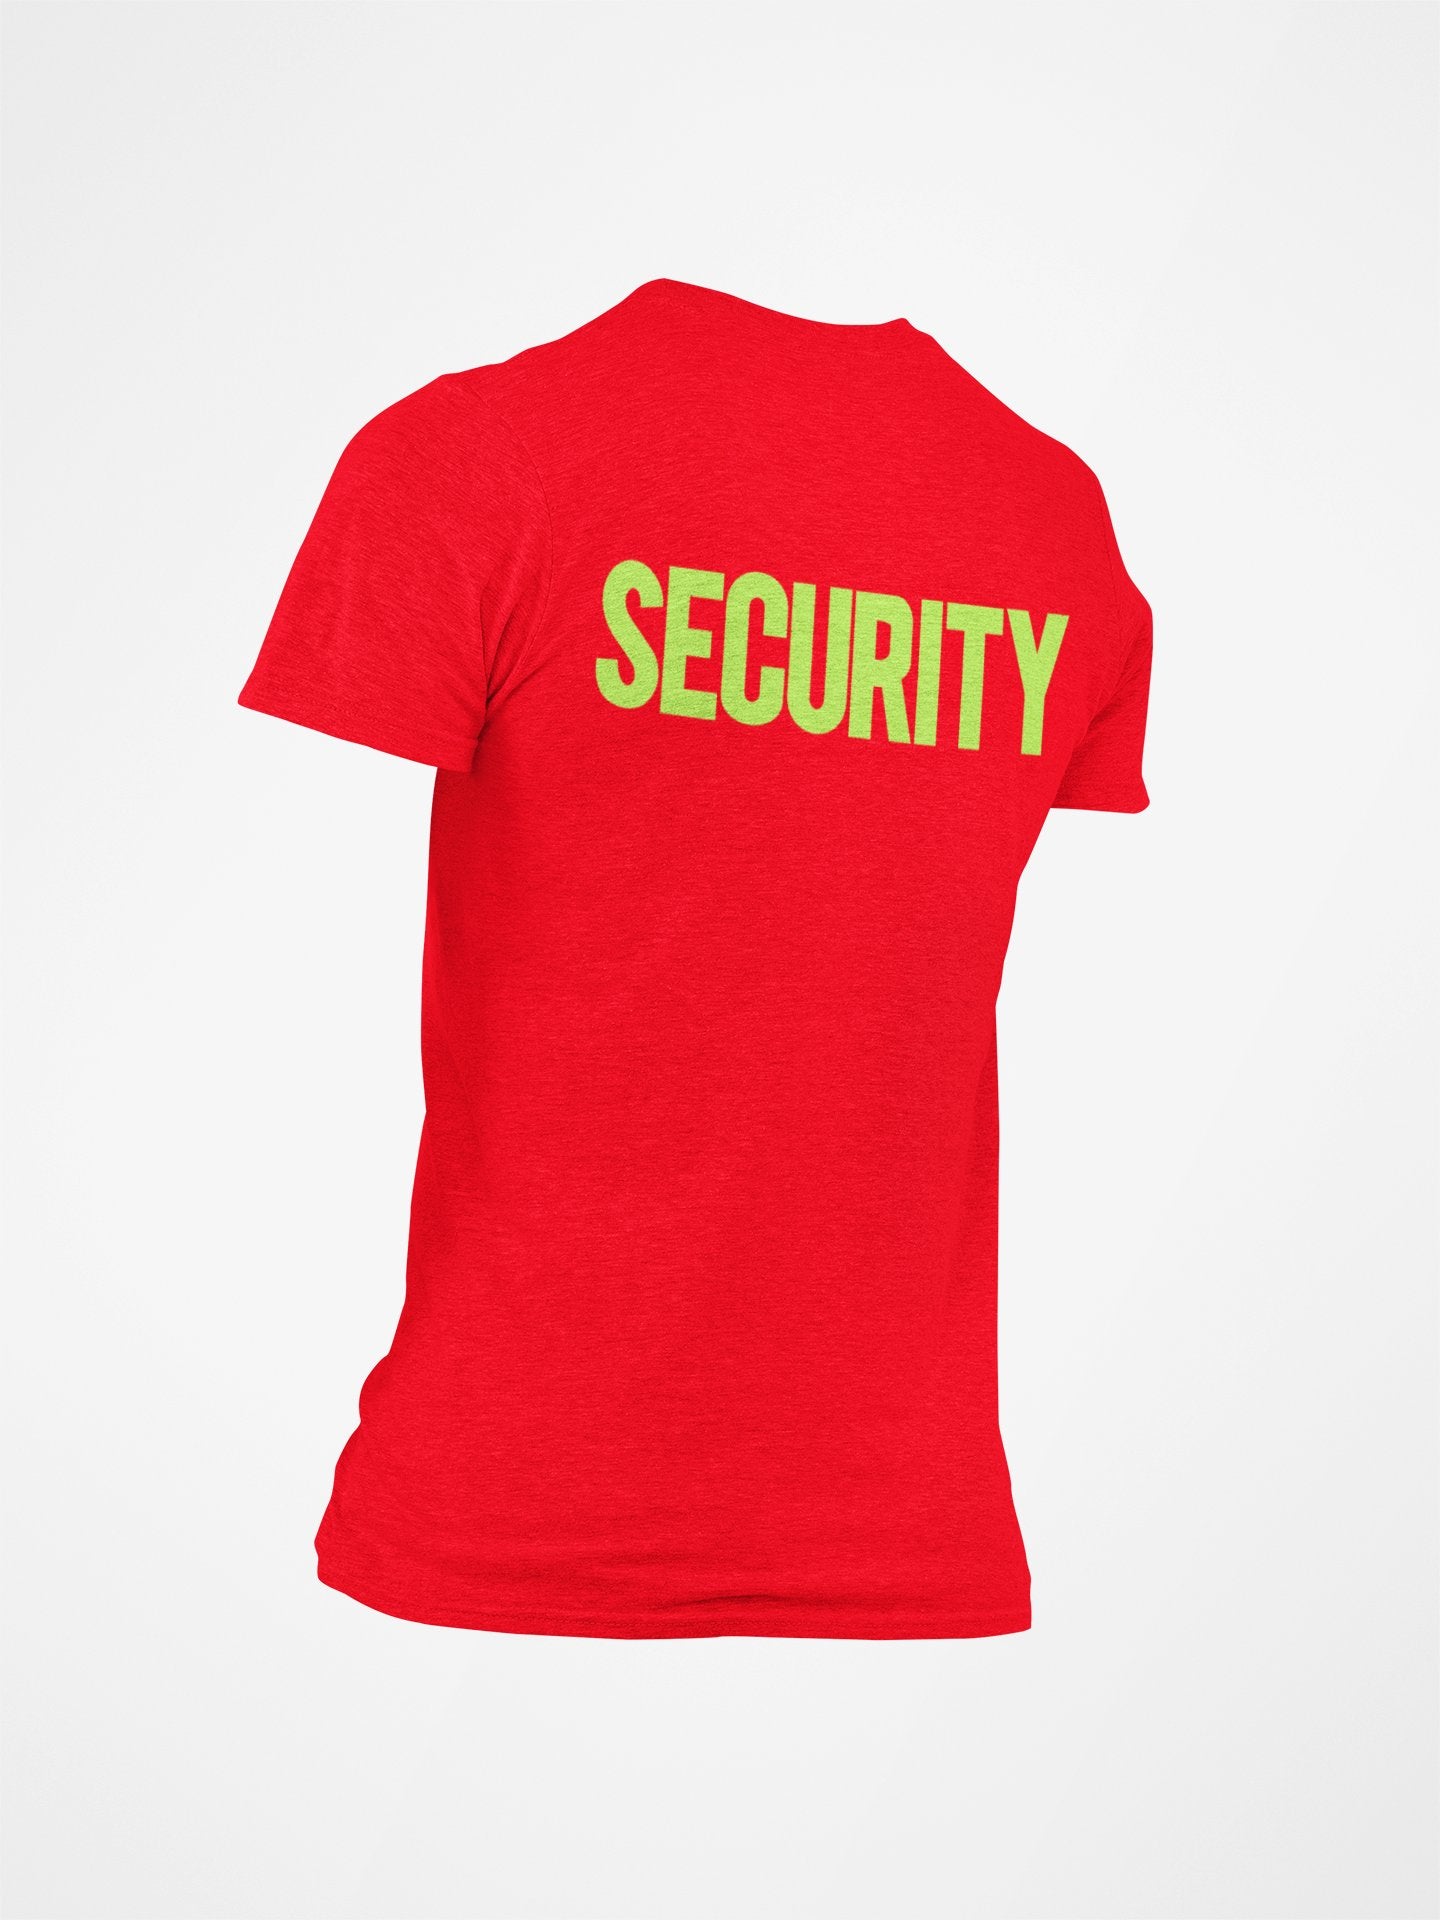 Security T-Shirt Front Back Screen Print (Red & Neon)